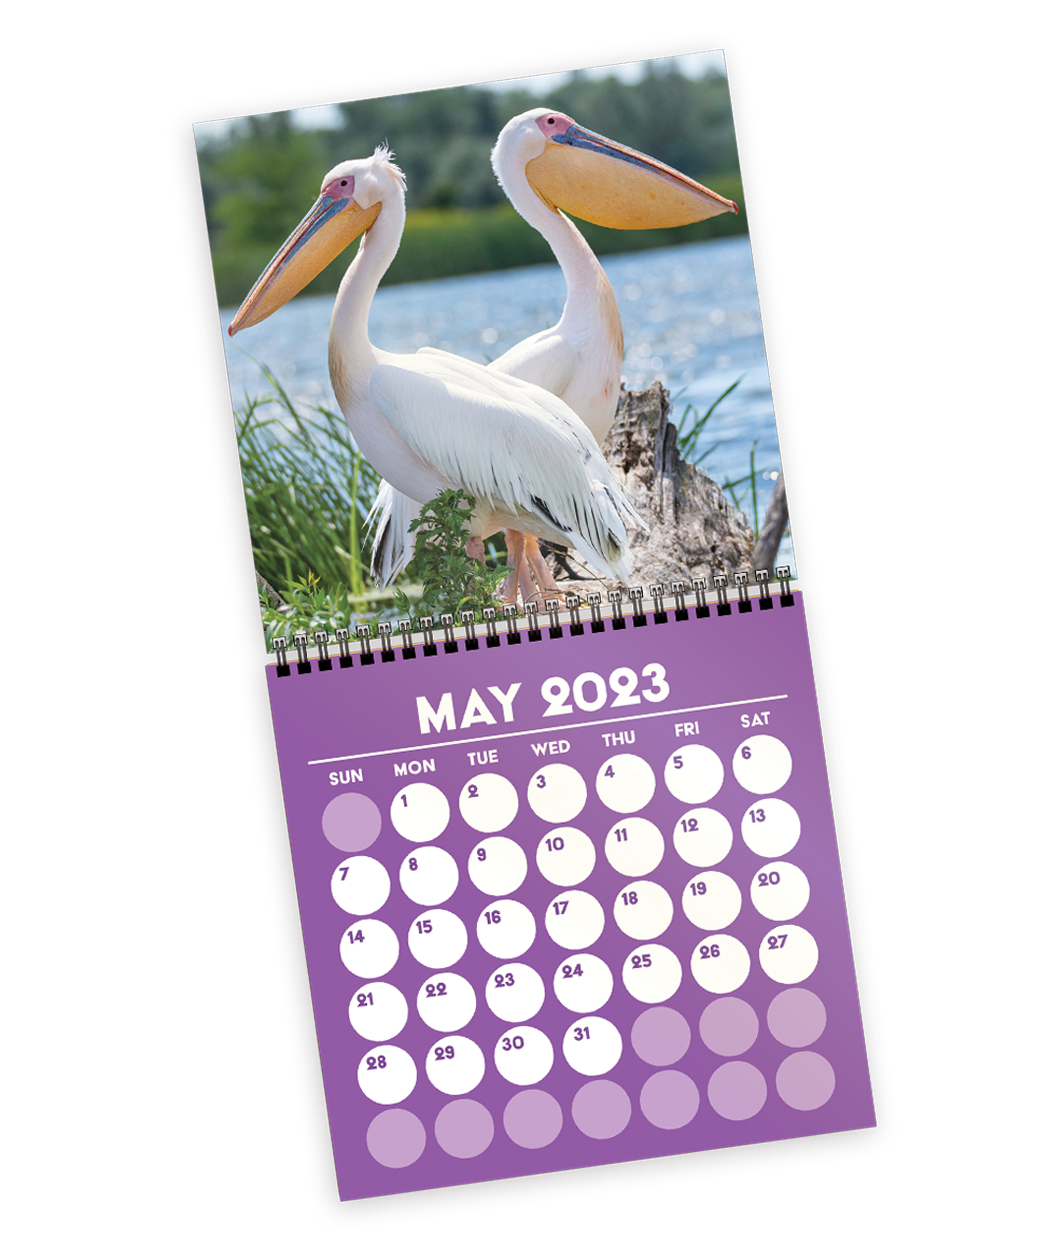 An inside page of the Project for Awesome calendar shows May 2023 and the picture is of two pelicans facing back to back. 